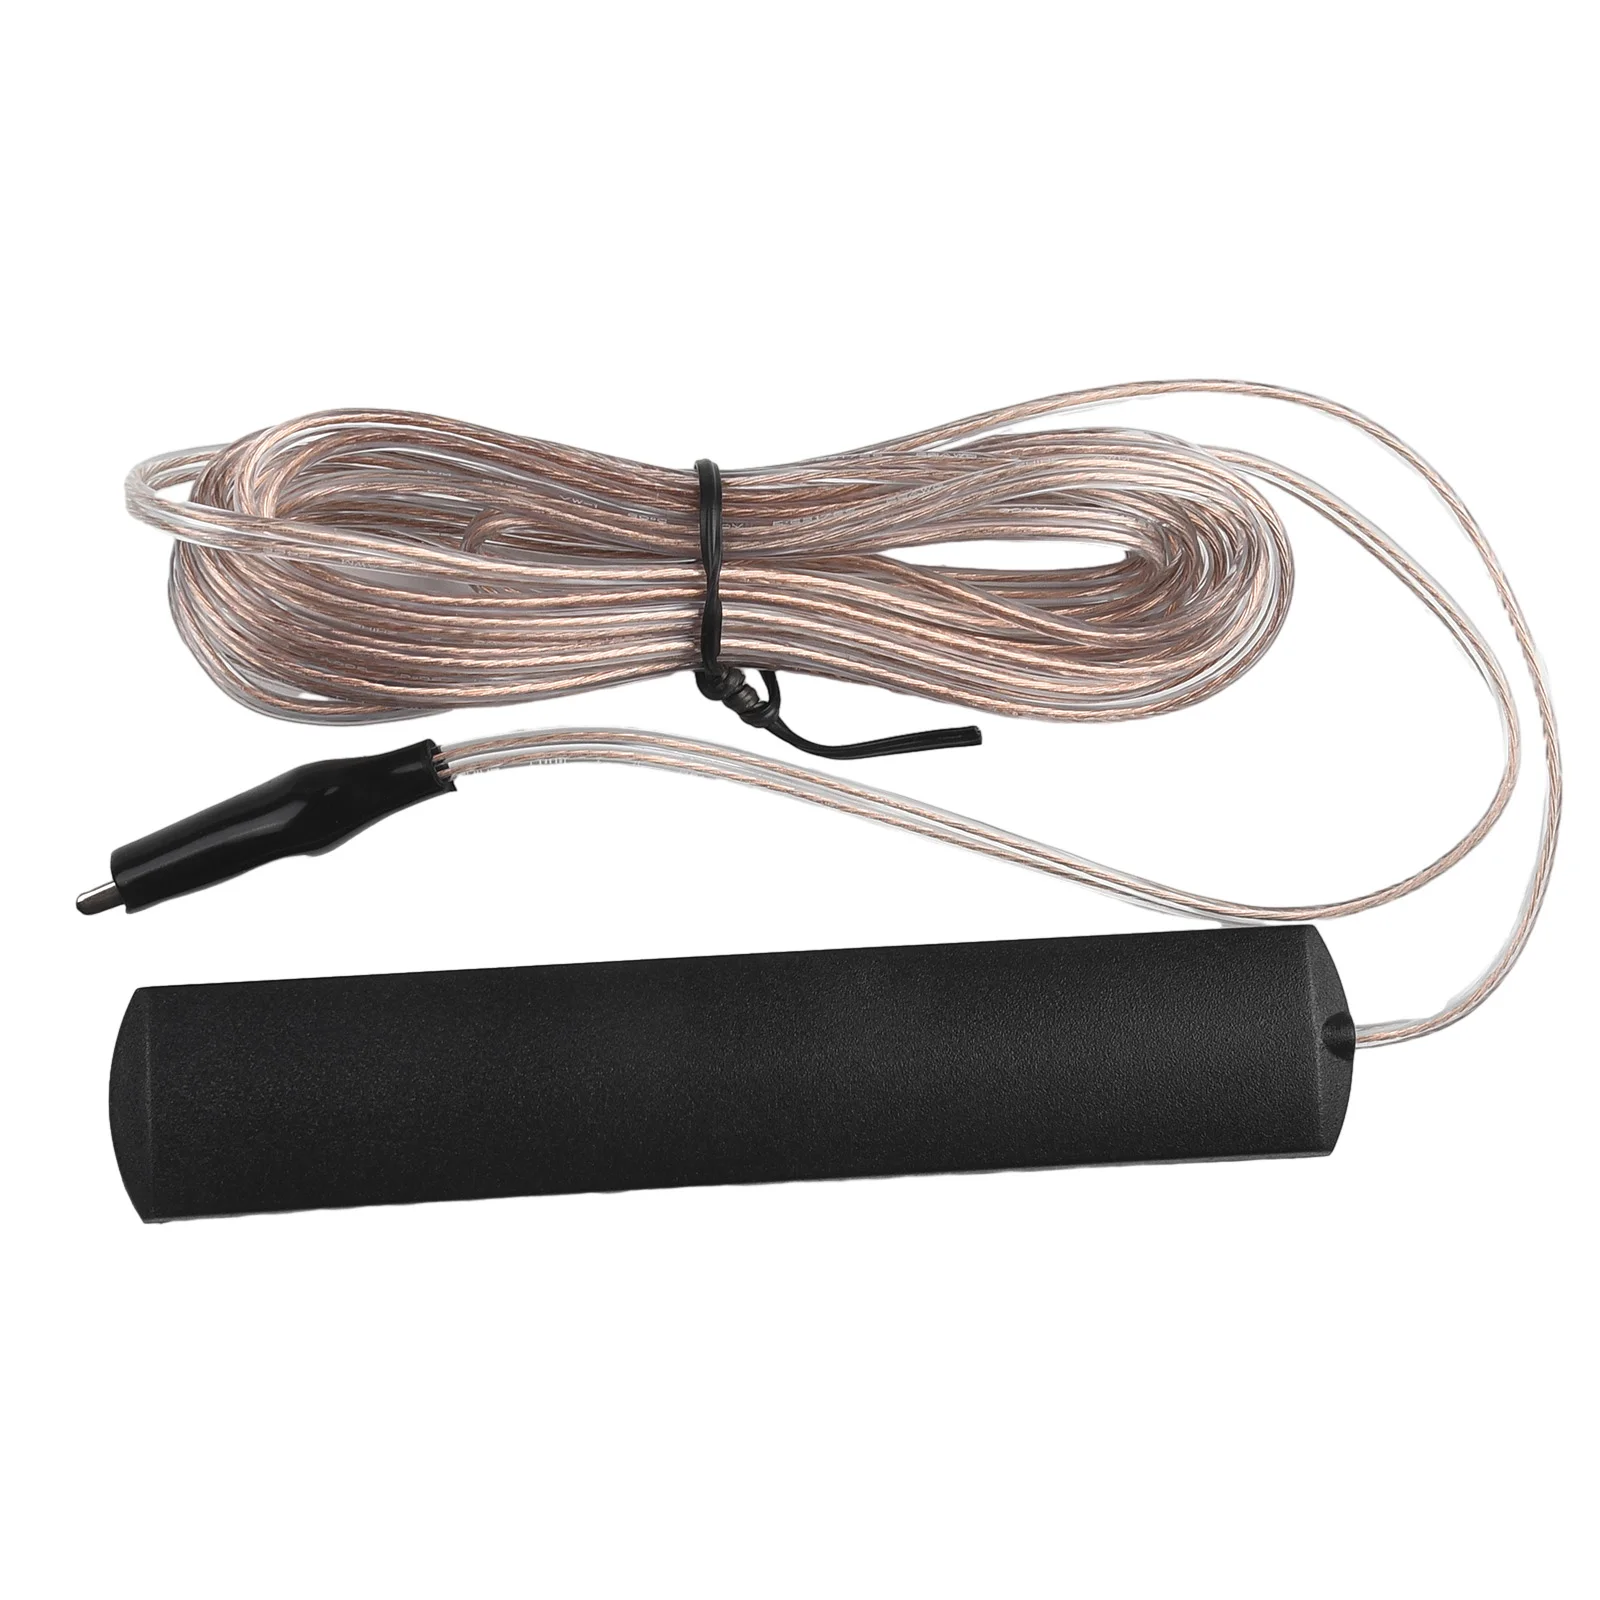 

Clip On Radio FM Stereo Antenna Indoor Length 5m Signal Enhance Stable Transfer Wide Compatible Alligator Connector